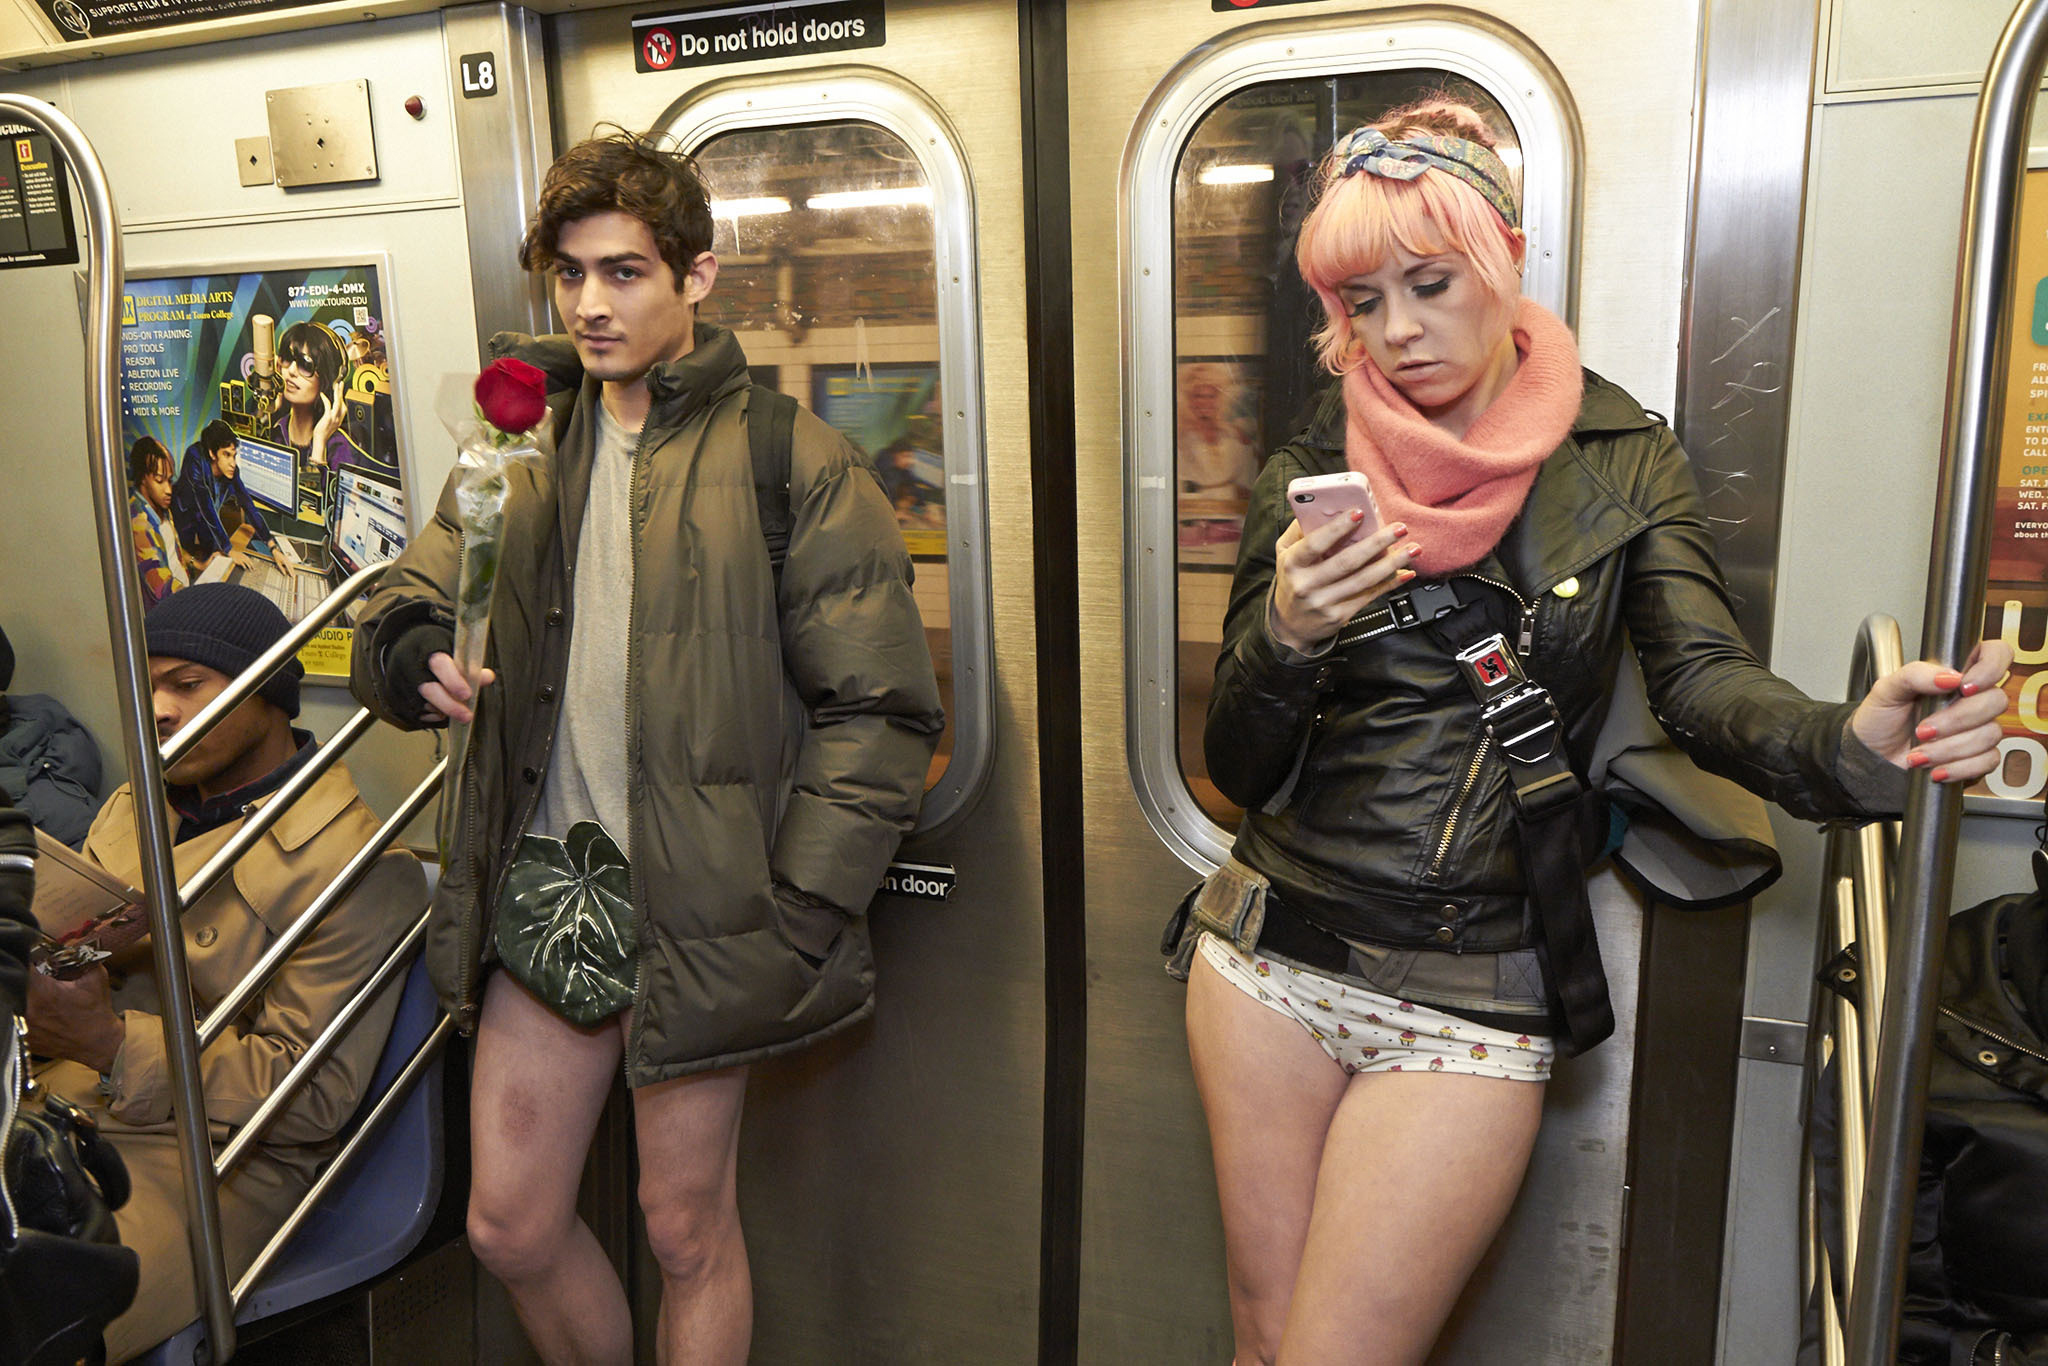 Thousands Of Pantless People Storm New York City For Annual 'No Pants Subway...